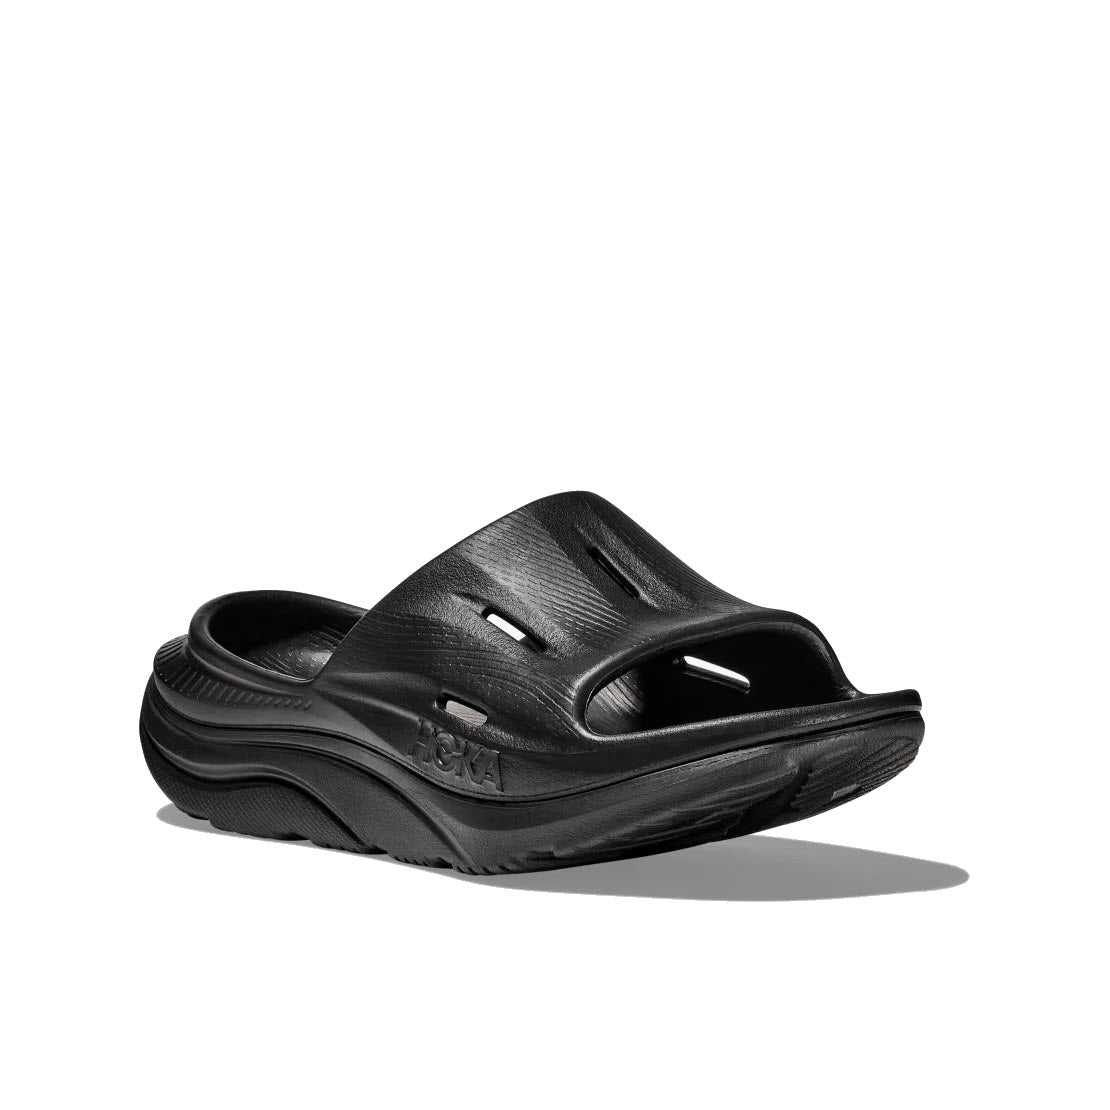 A pair of black sporty HOKA ORA RECOVERY SLIDE 3 sandals with a textured design and thick, dual-density geometry soles, isolated on a white background.